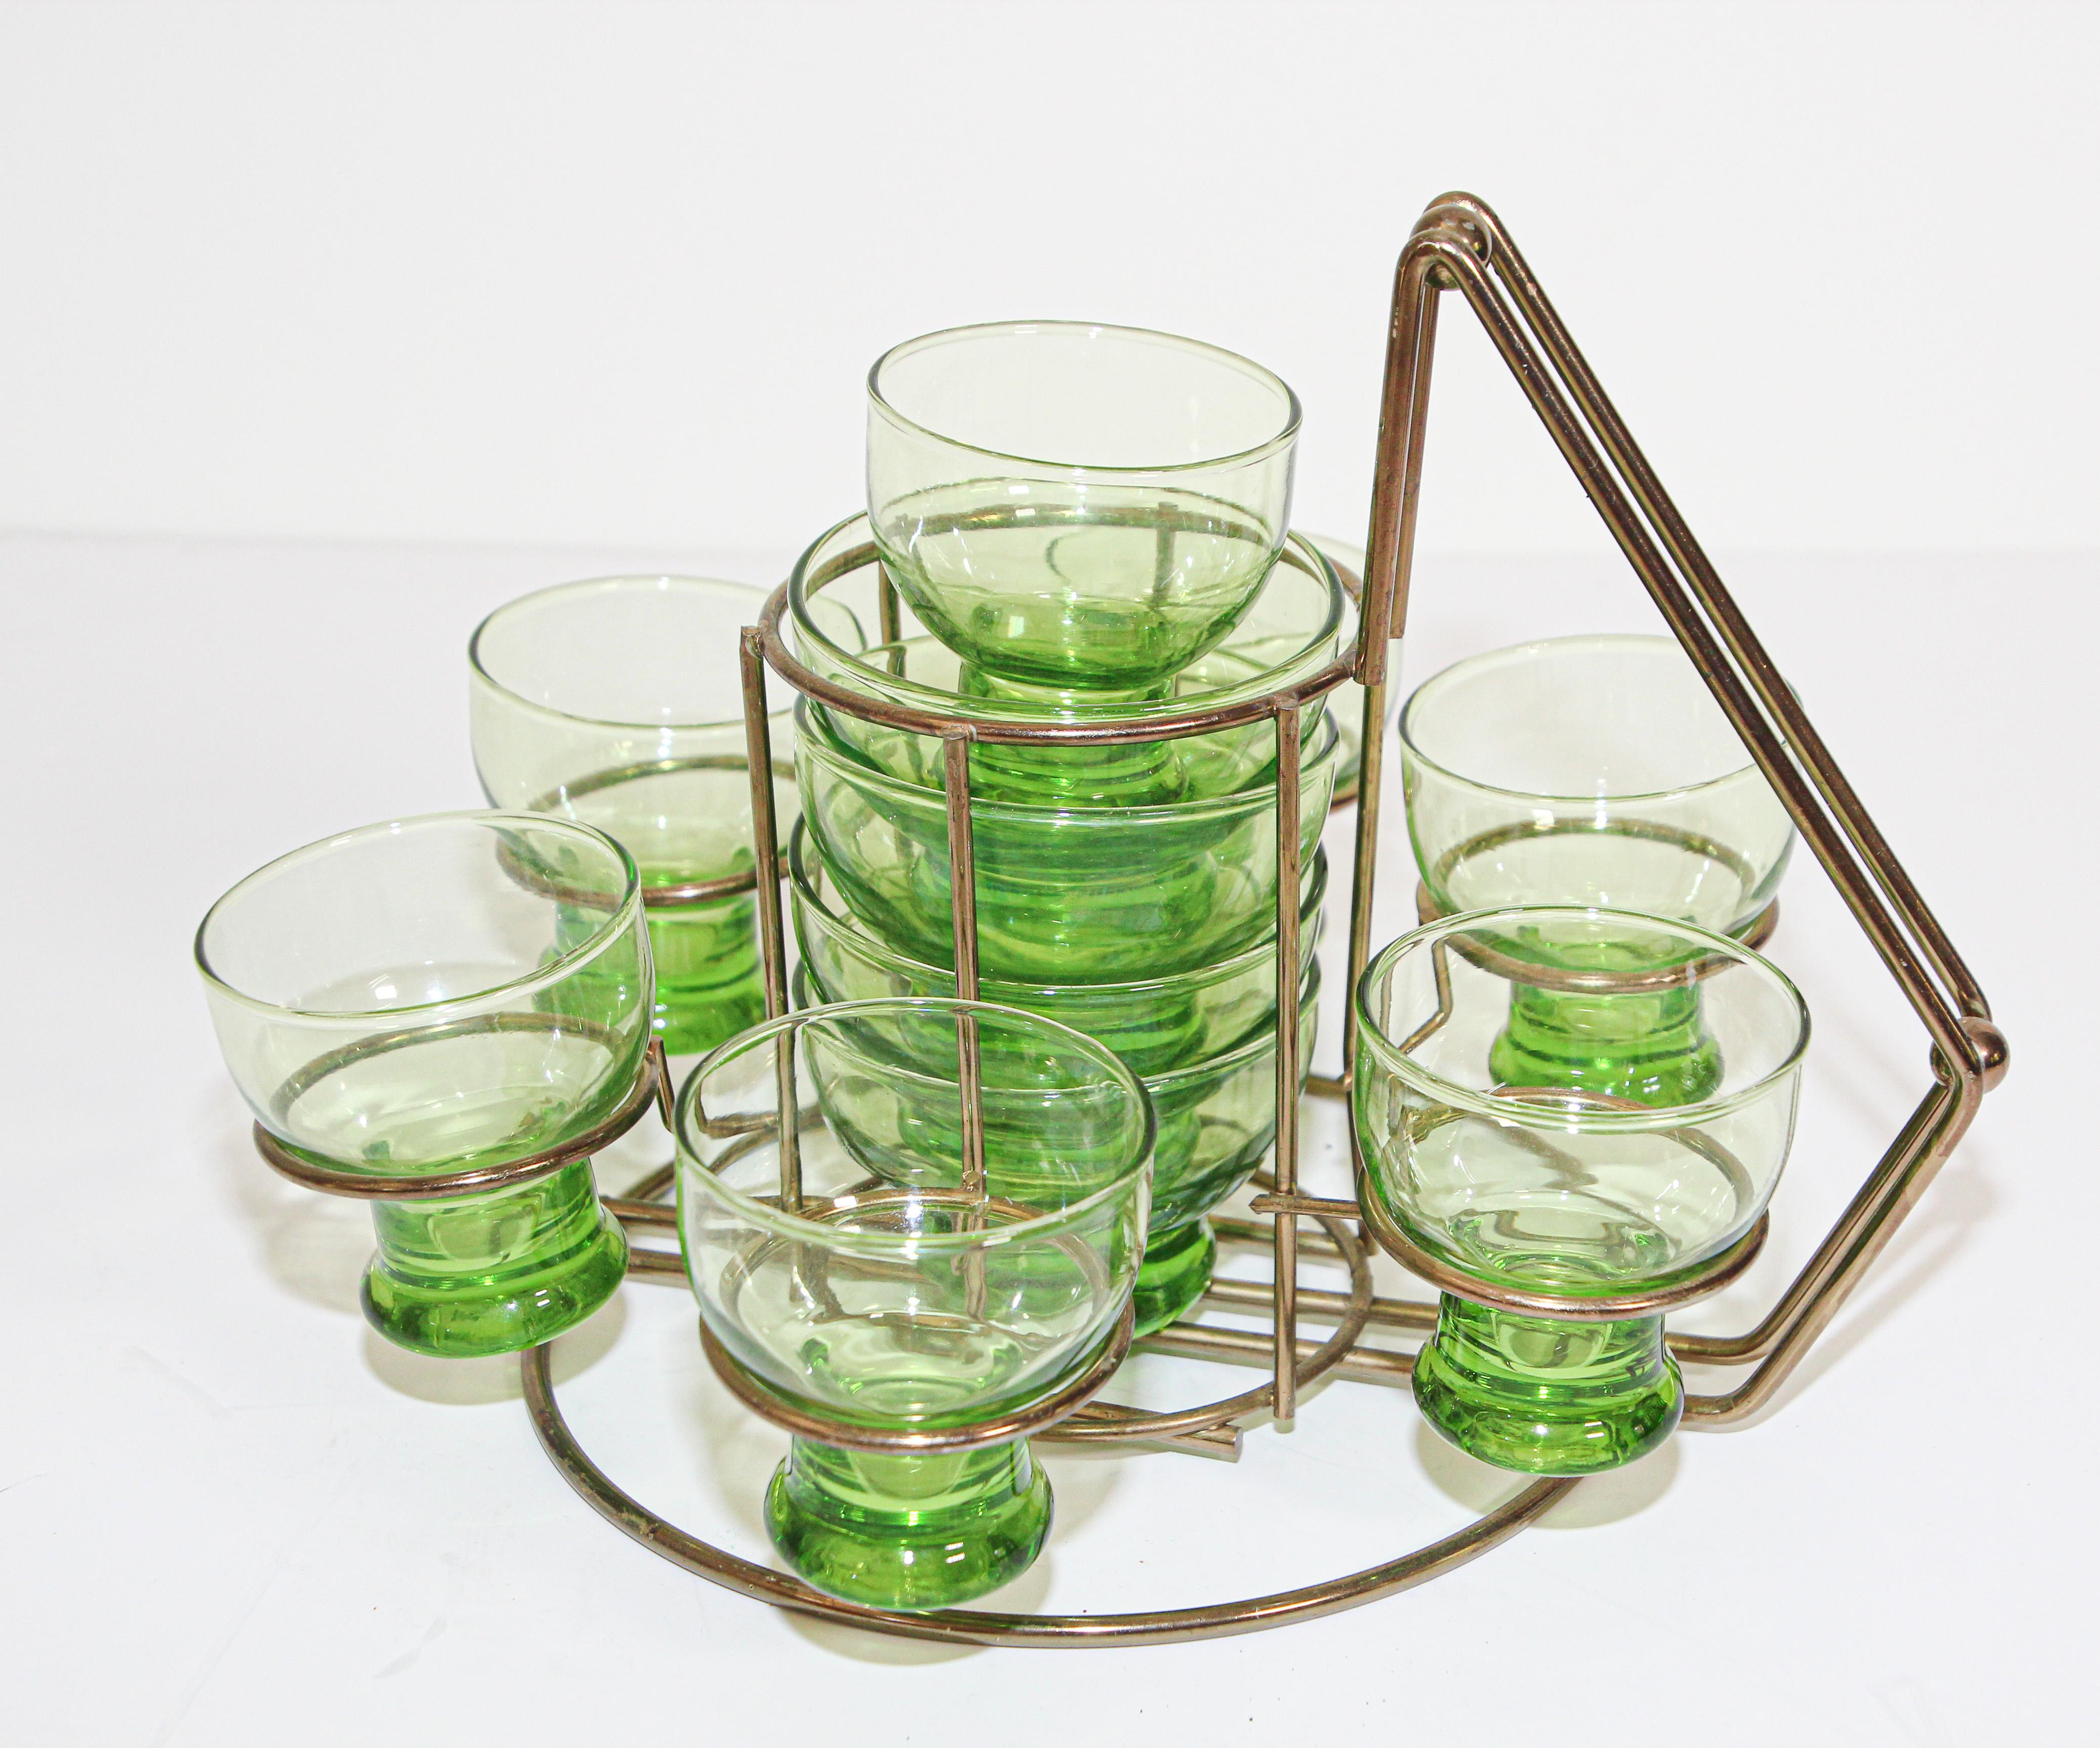 Elegant exquisite vintage set of green cocktail glasses circa 1960s presented in a metal brass cart.
Fantastic midcentury glasses in excellent vintage condition with original accompanying carrying tray.
7 small glasses: Size: 3